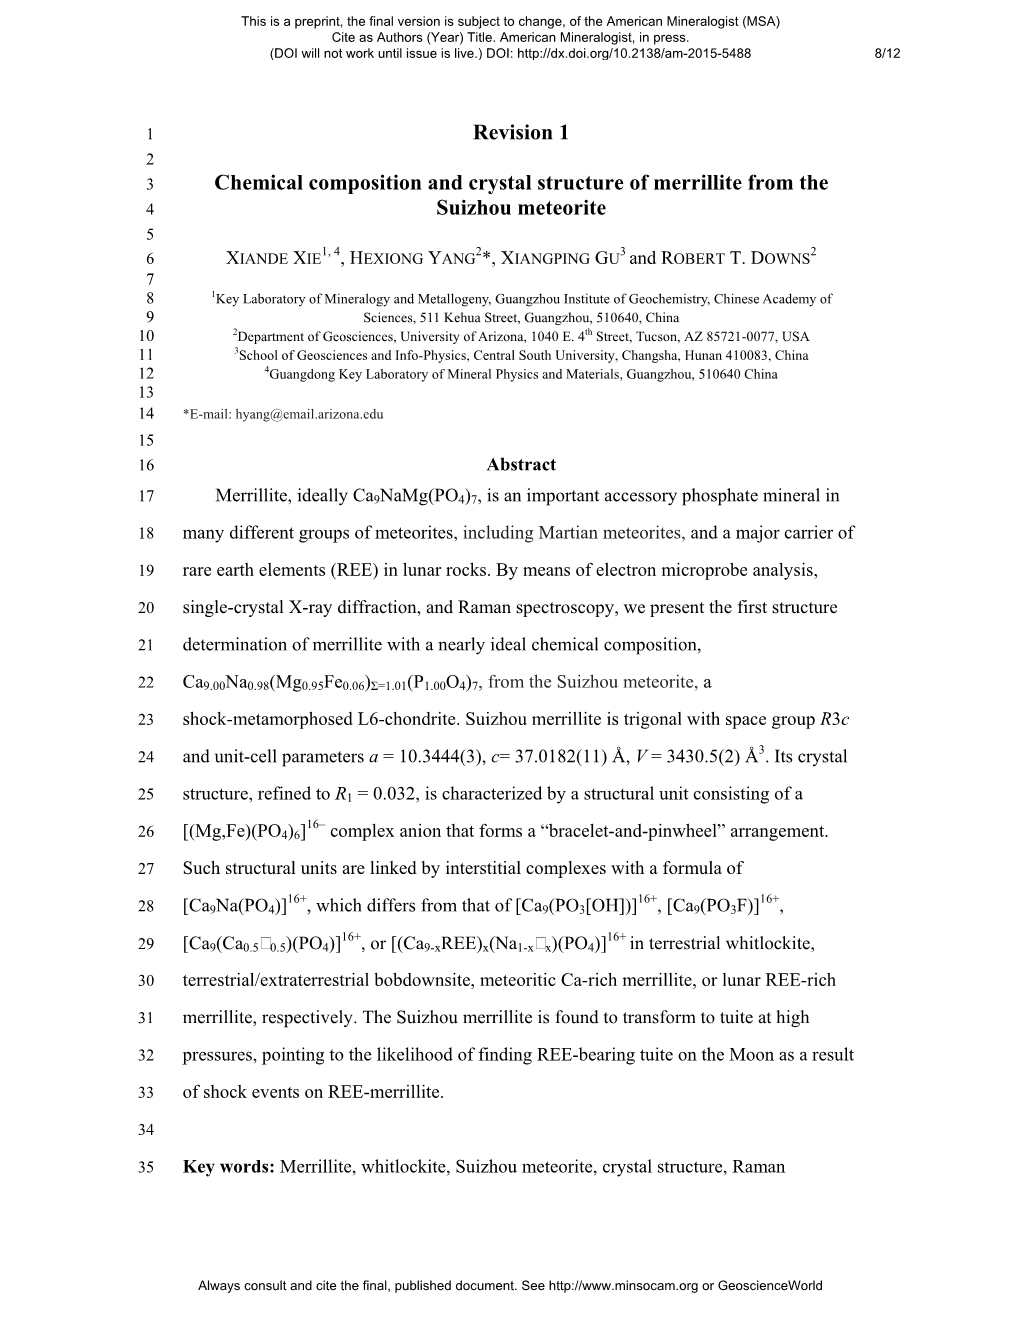 Revision 1 Chemical Composition and Crystal Structure of Merrillite from The